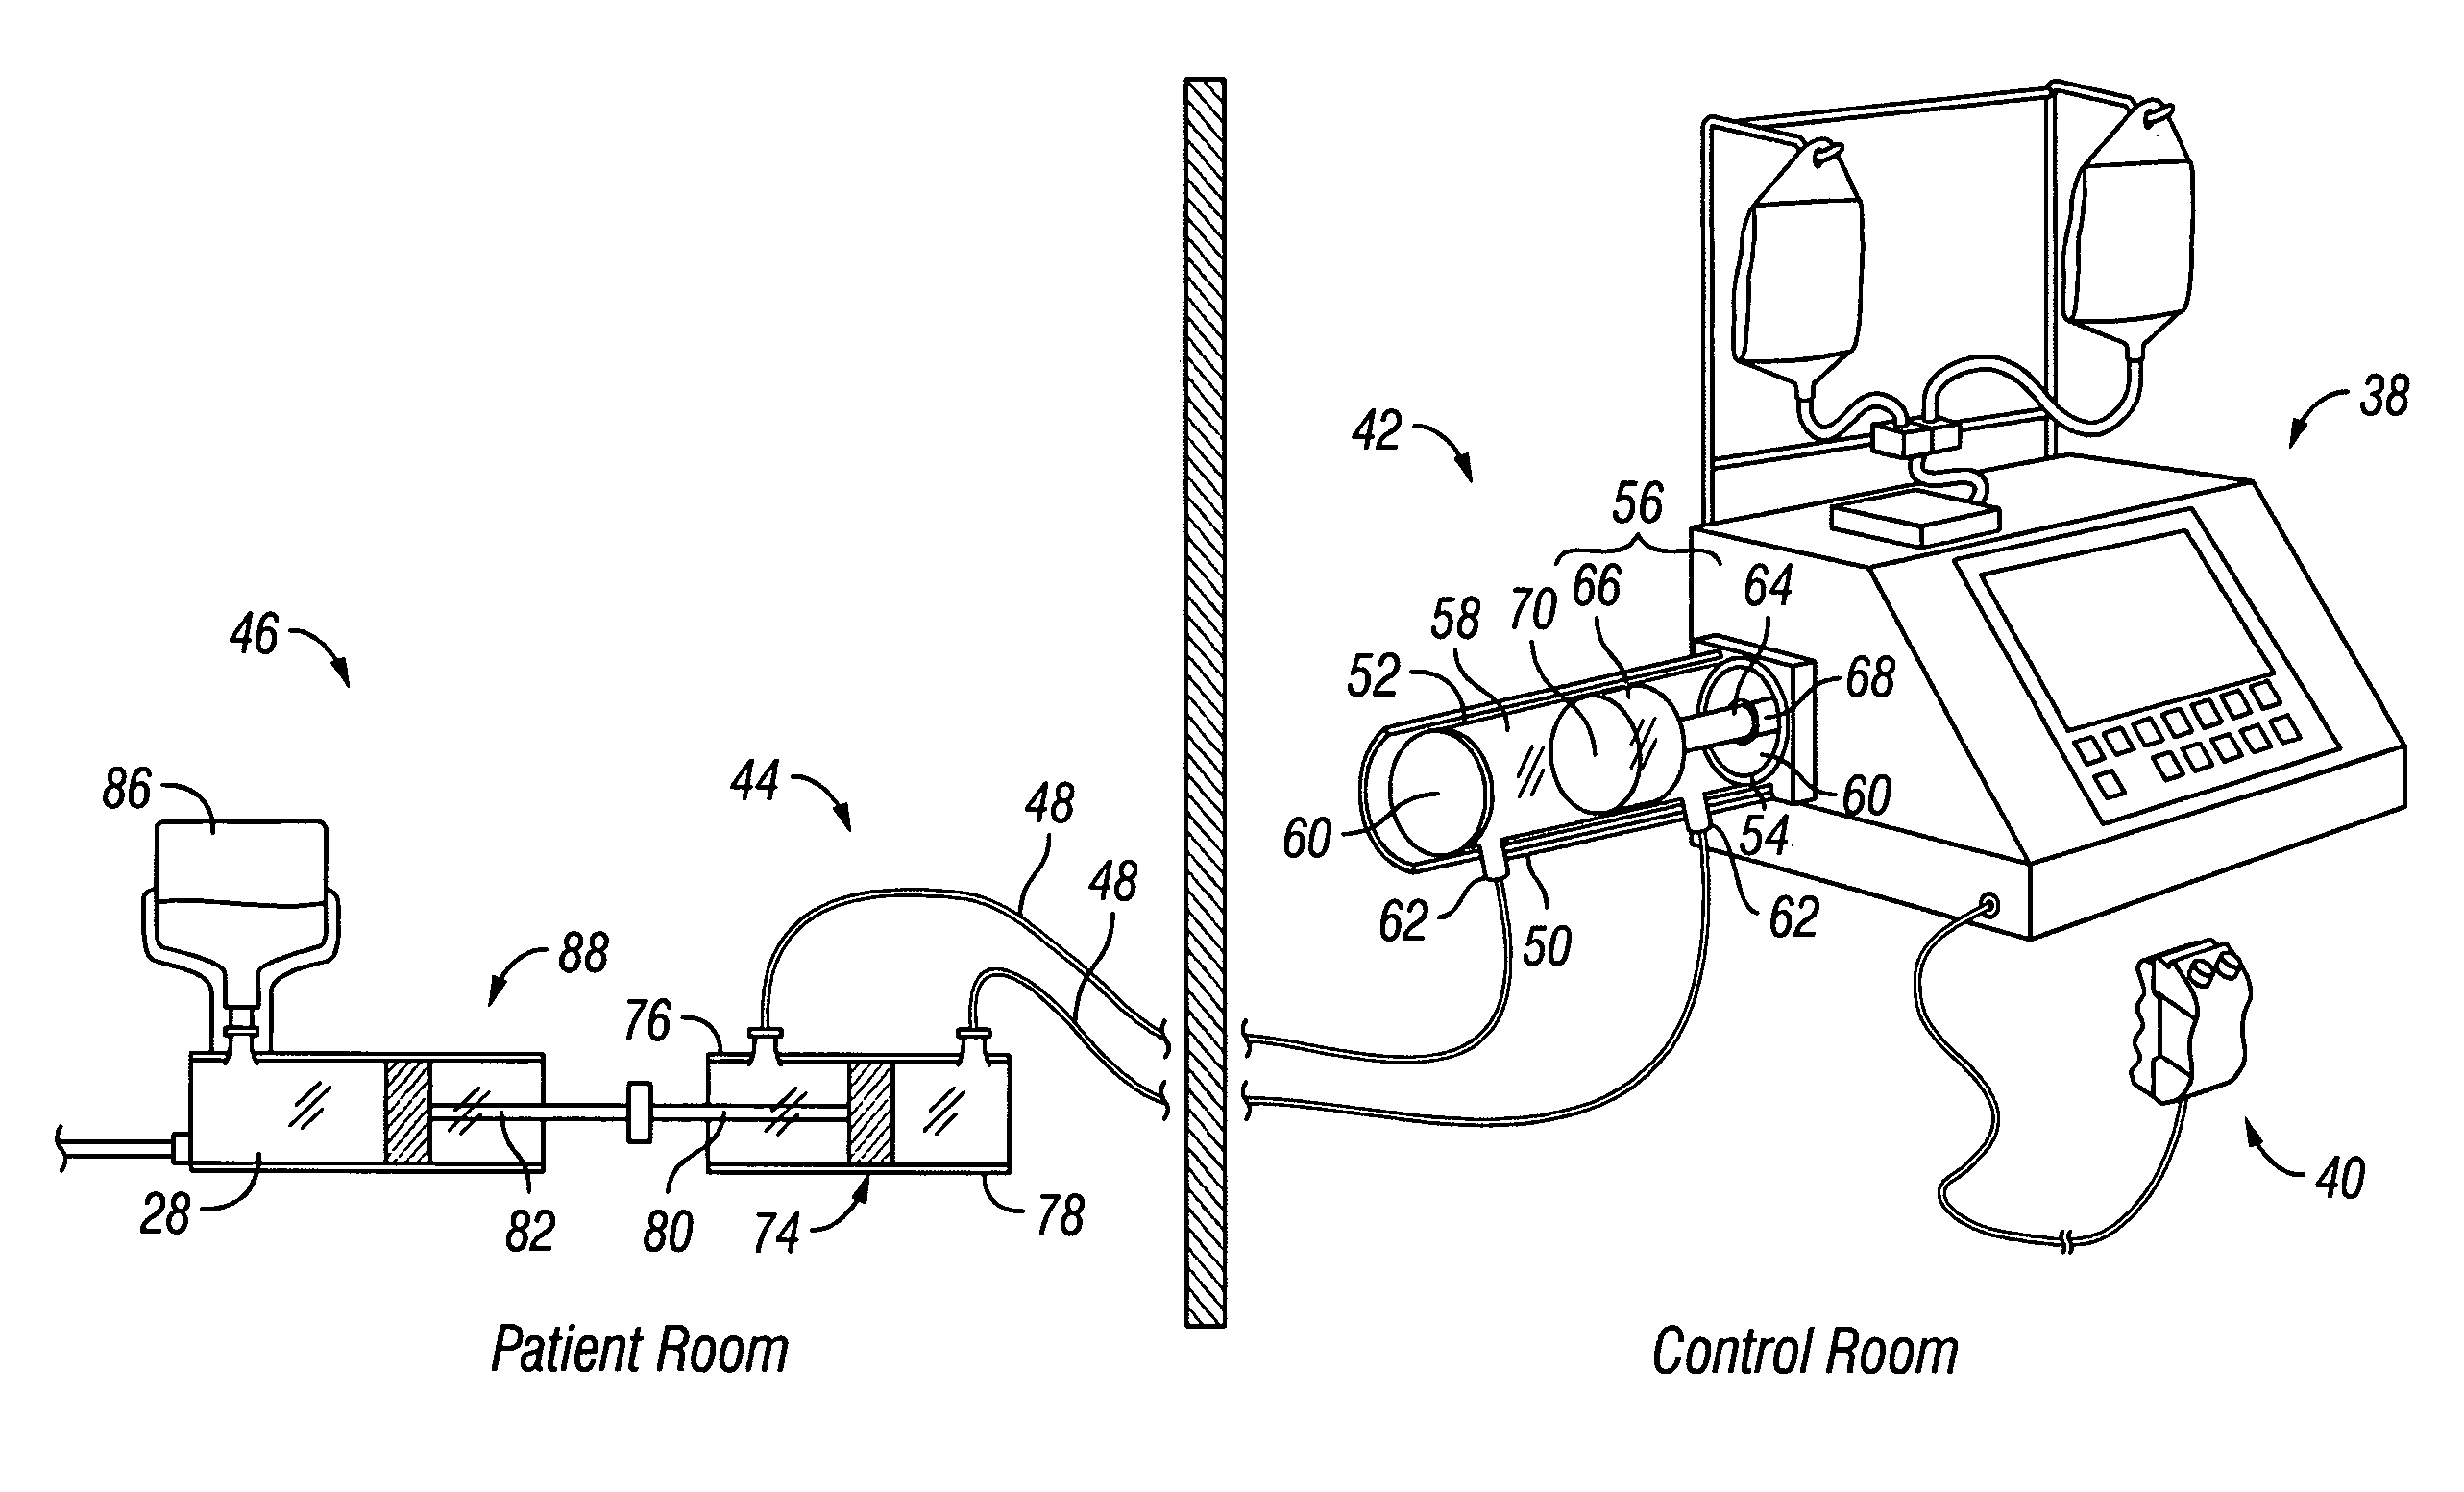 Fluid injector system